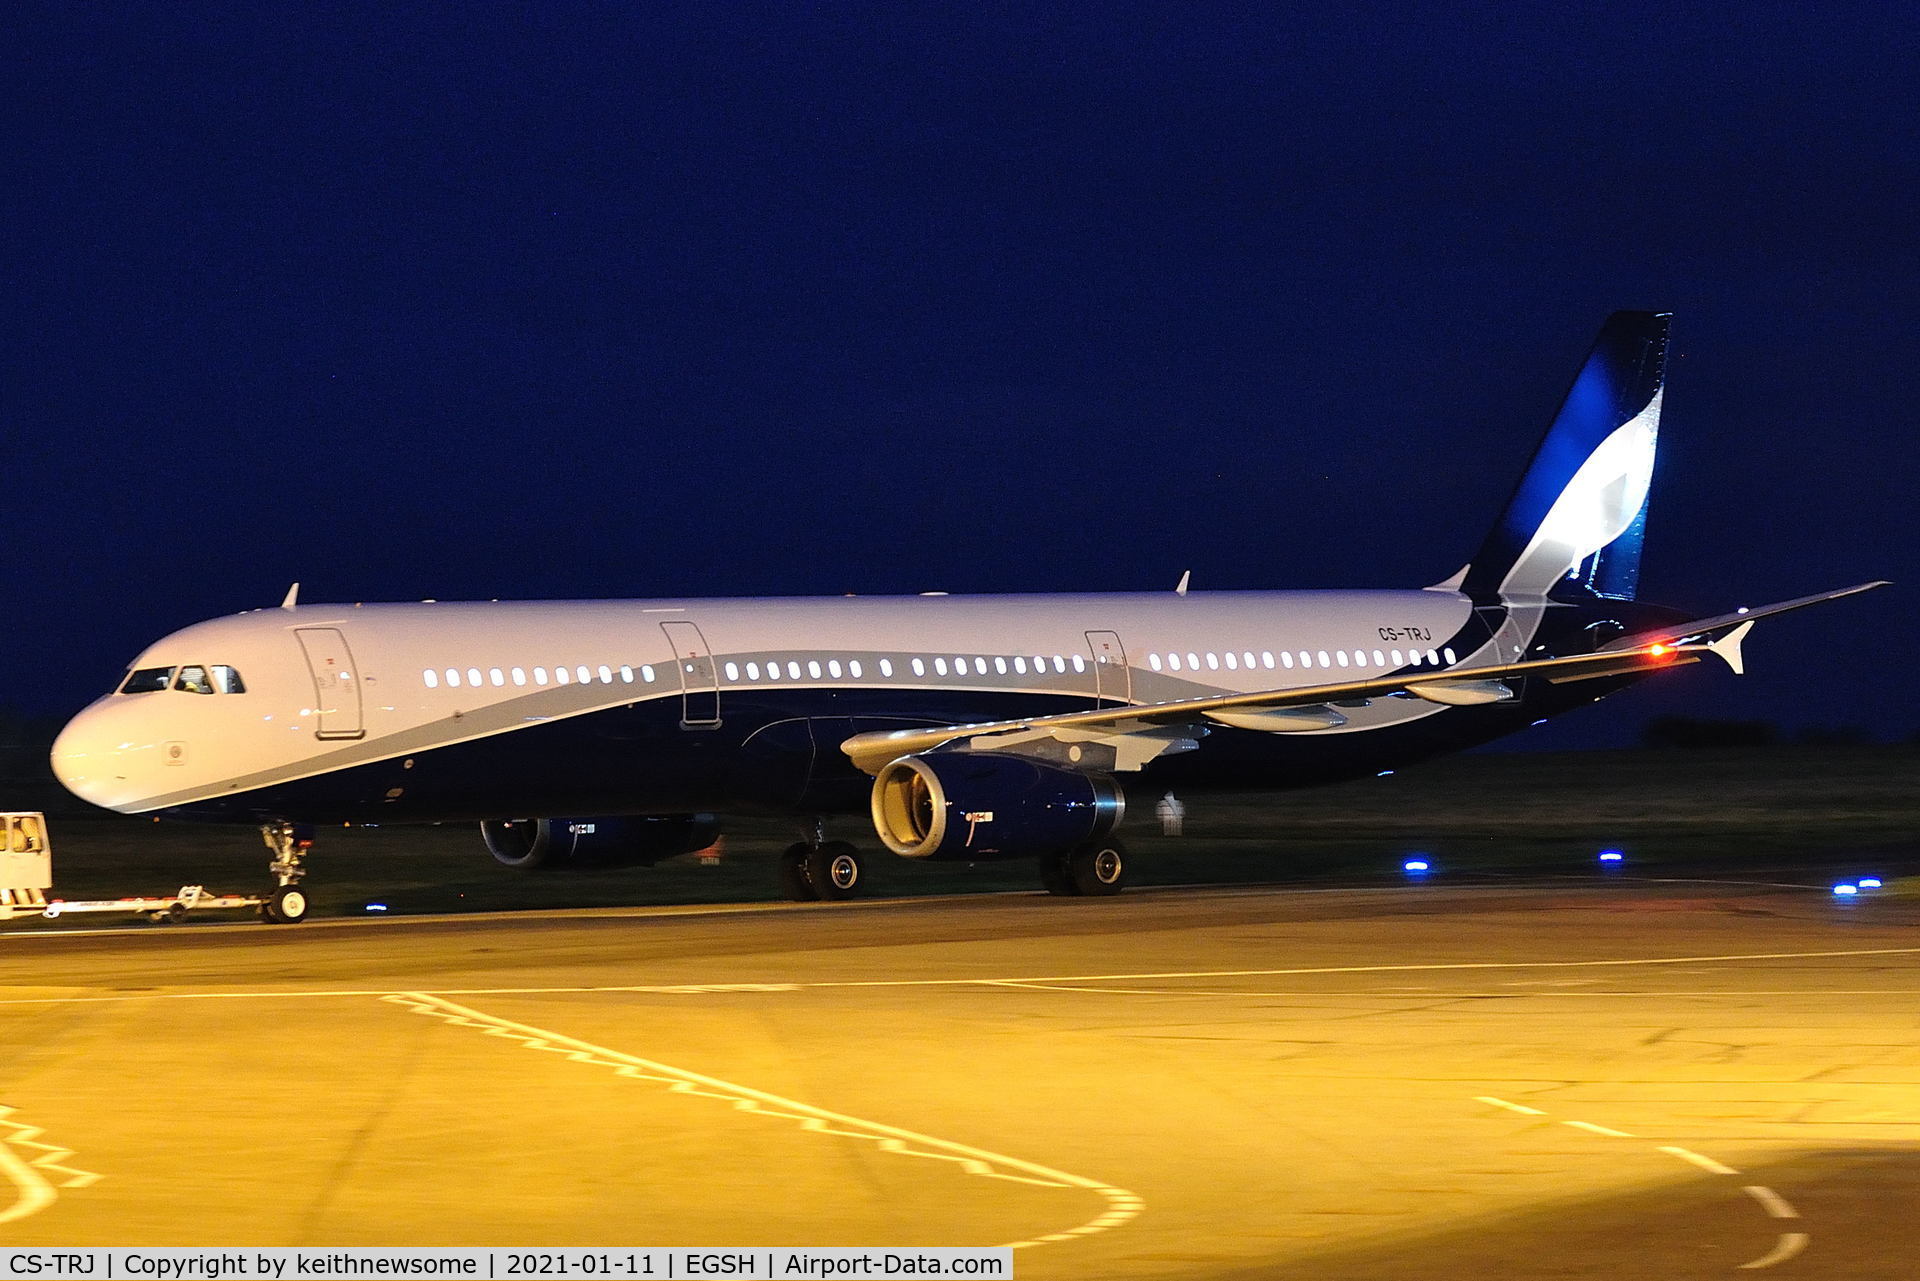 CS-TRJ, 1999 Airbus A321-231 C/N 1004, Removed from spray shop with new colour scheme.